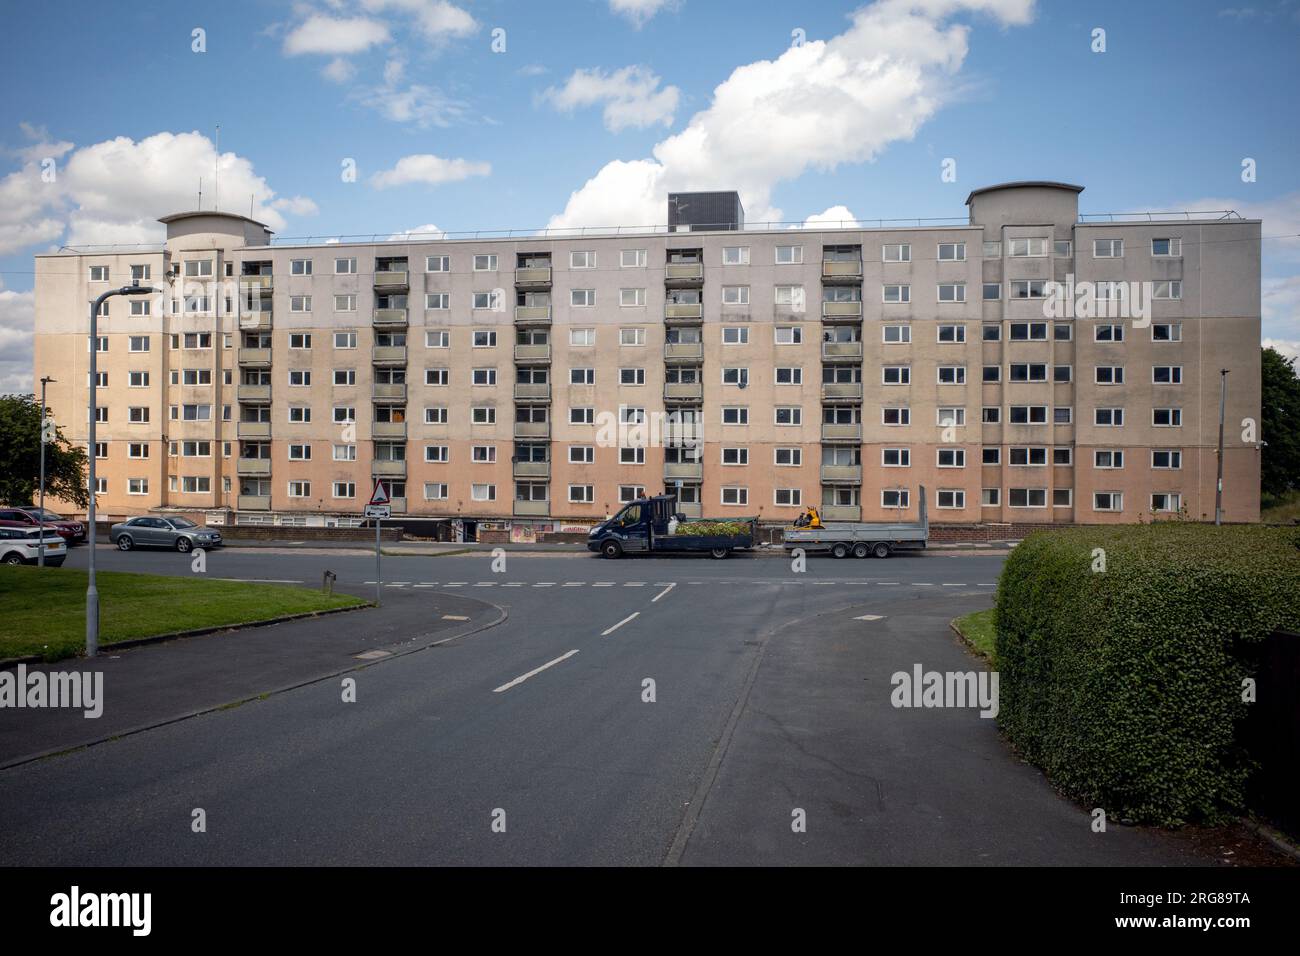 Large block of flats in Bradford. The notorious and run down 'York House' in Thorpe Edge. Earmarked for demolition or redevelopment. UK Social Housing Stock Photo